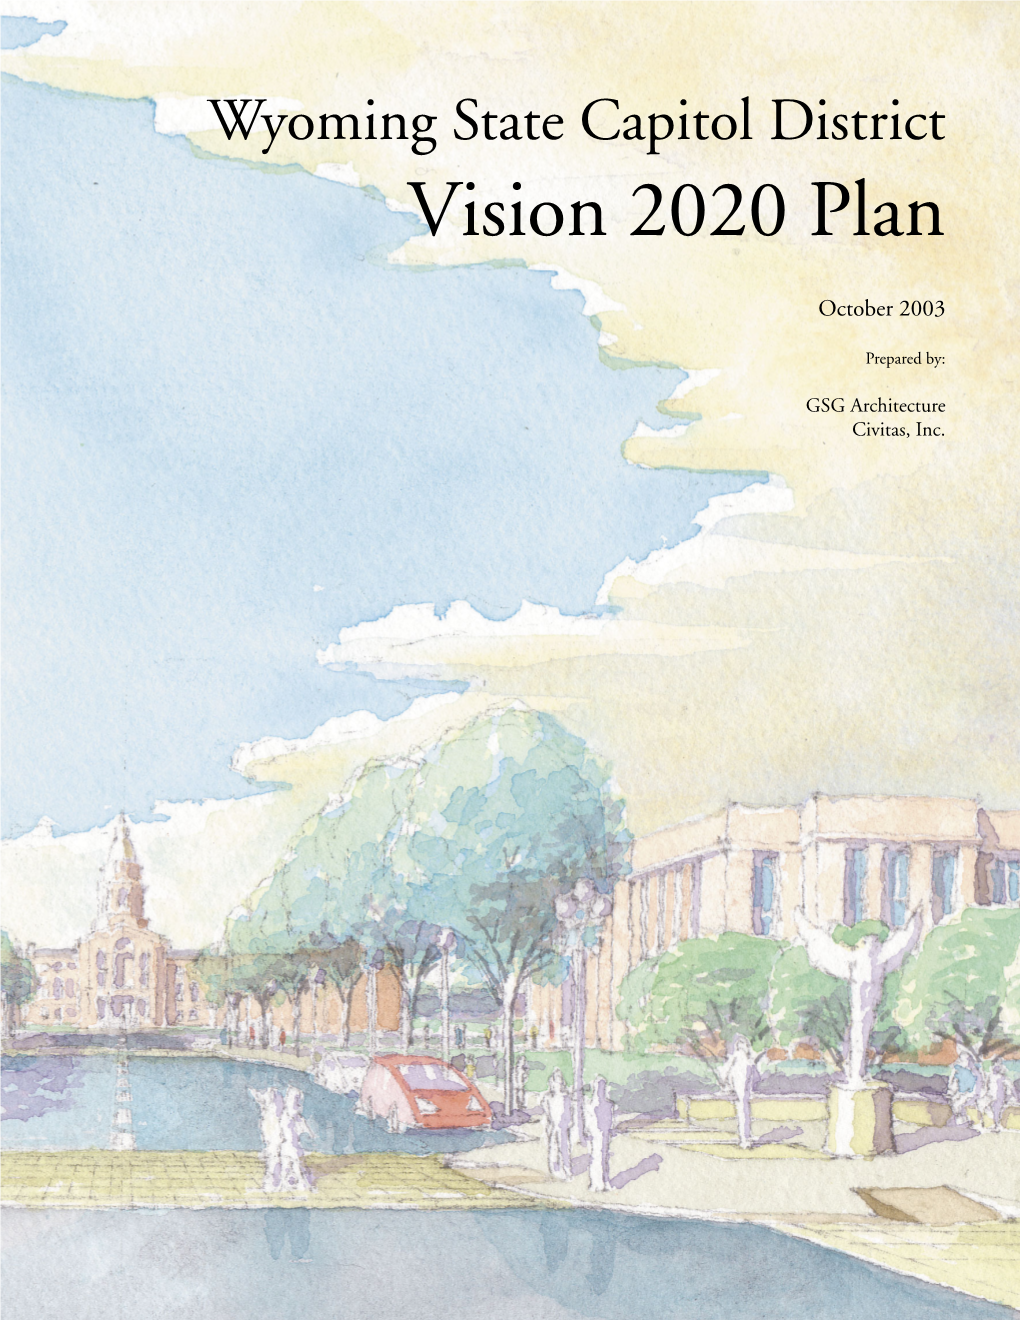 Wyoming State Capitol District Vision 2020 Plan